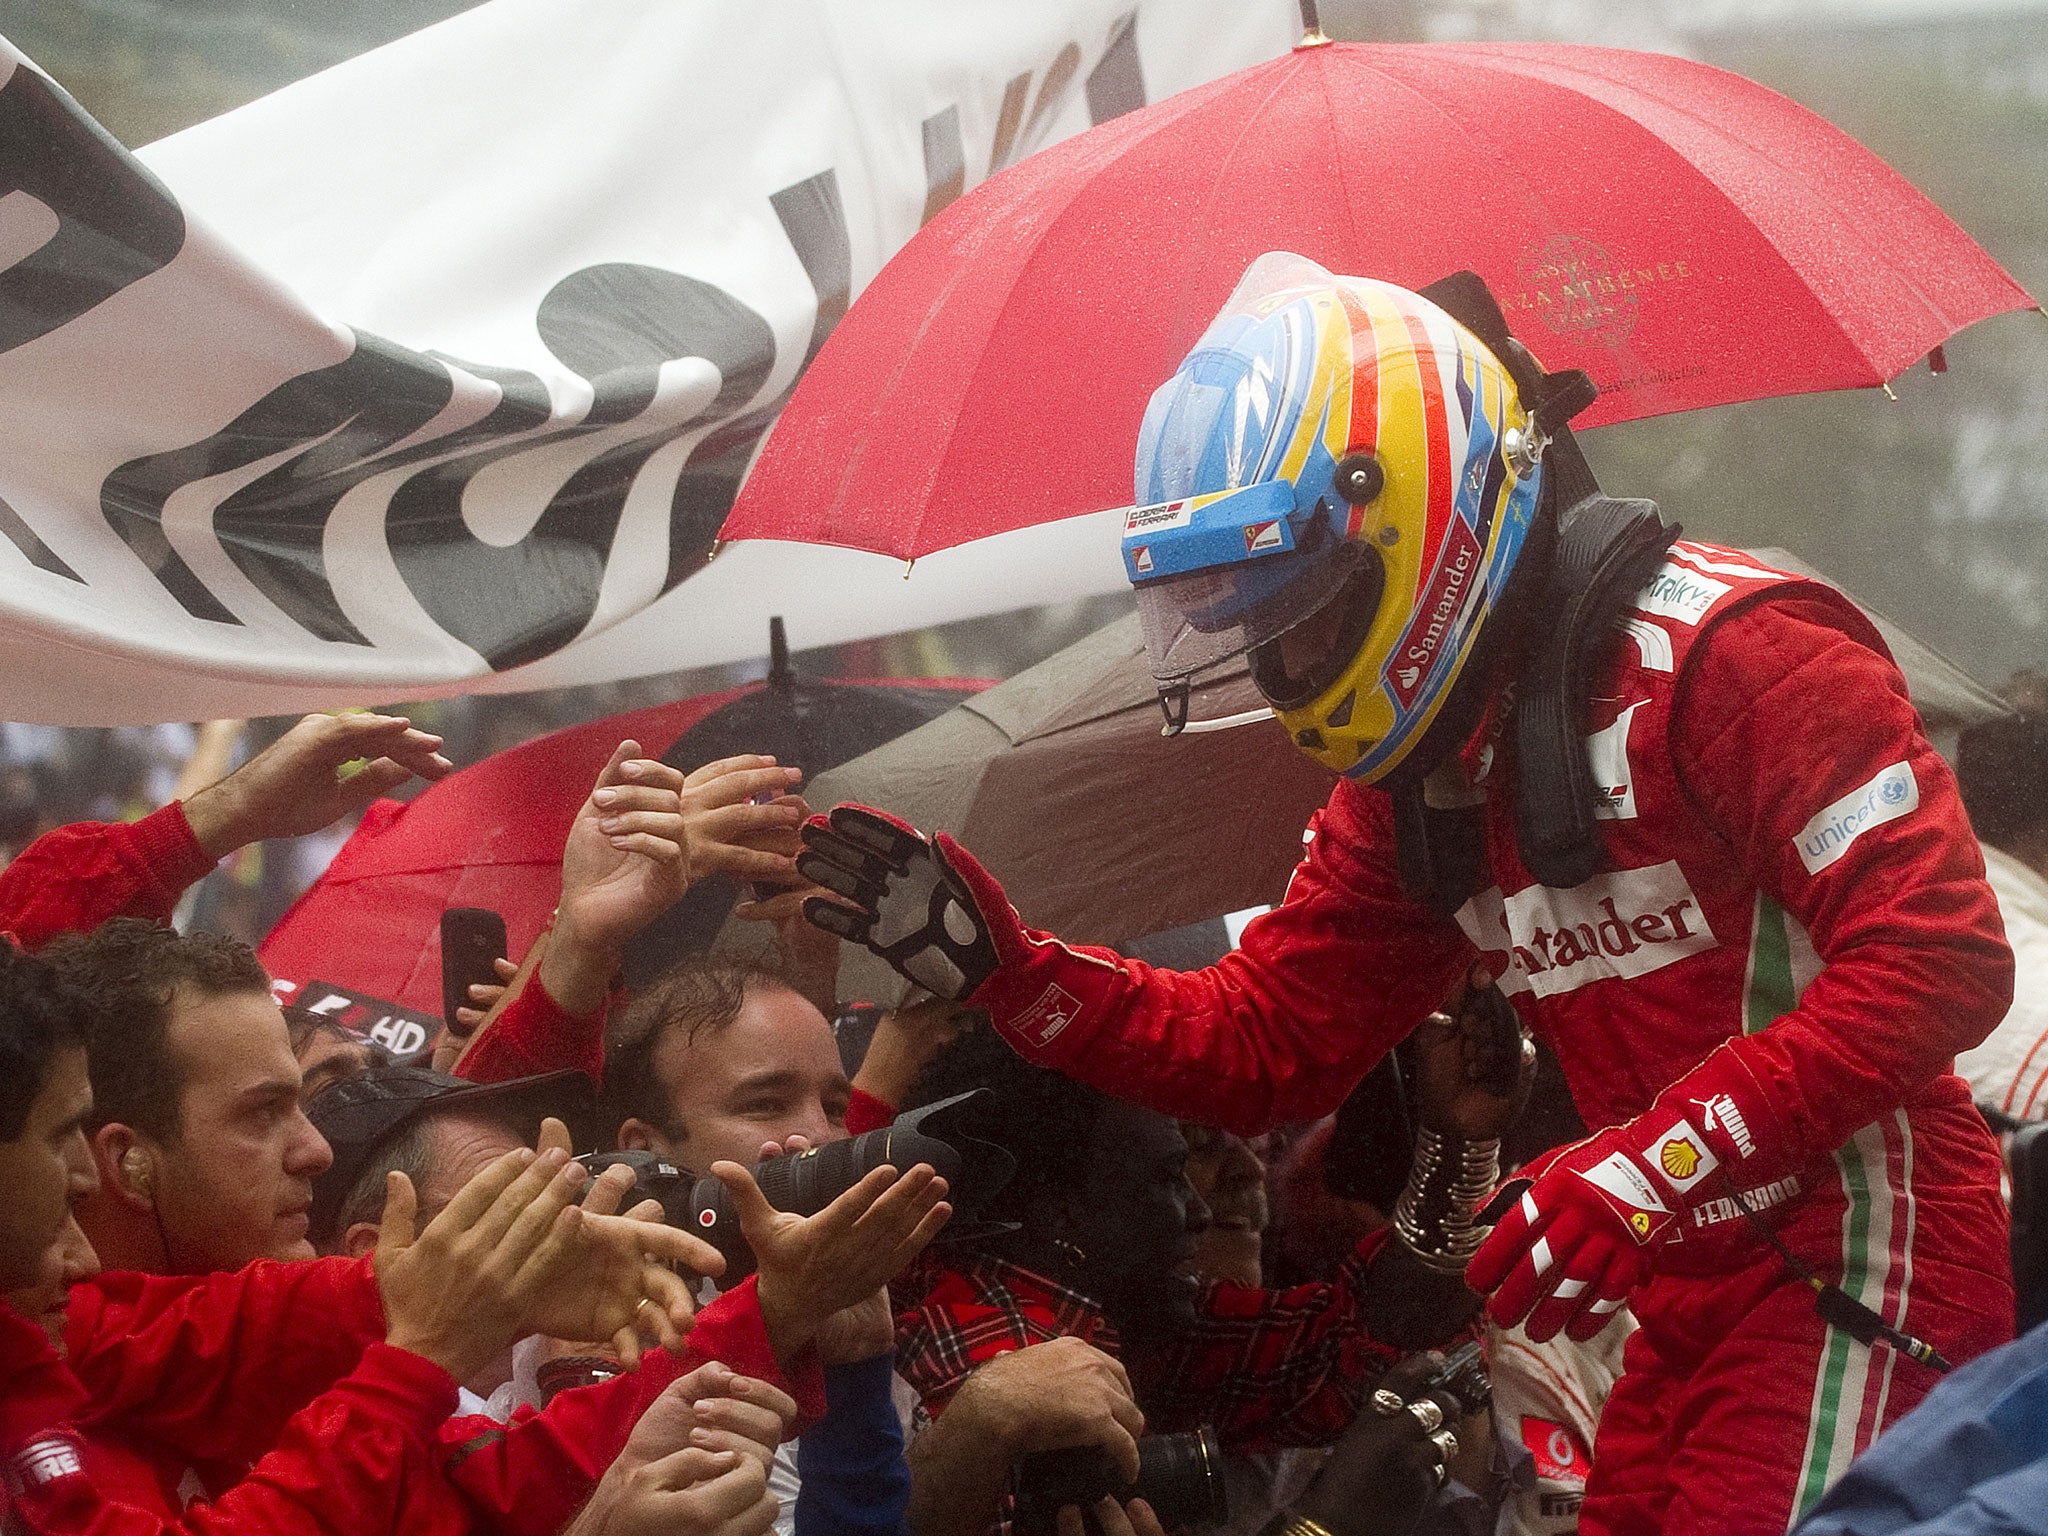 Spanish Formula One driver Fernando Alonso with the Ferrari team after missing out on another championship title in the last race of the season